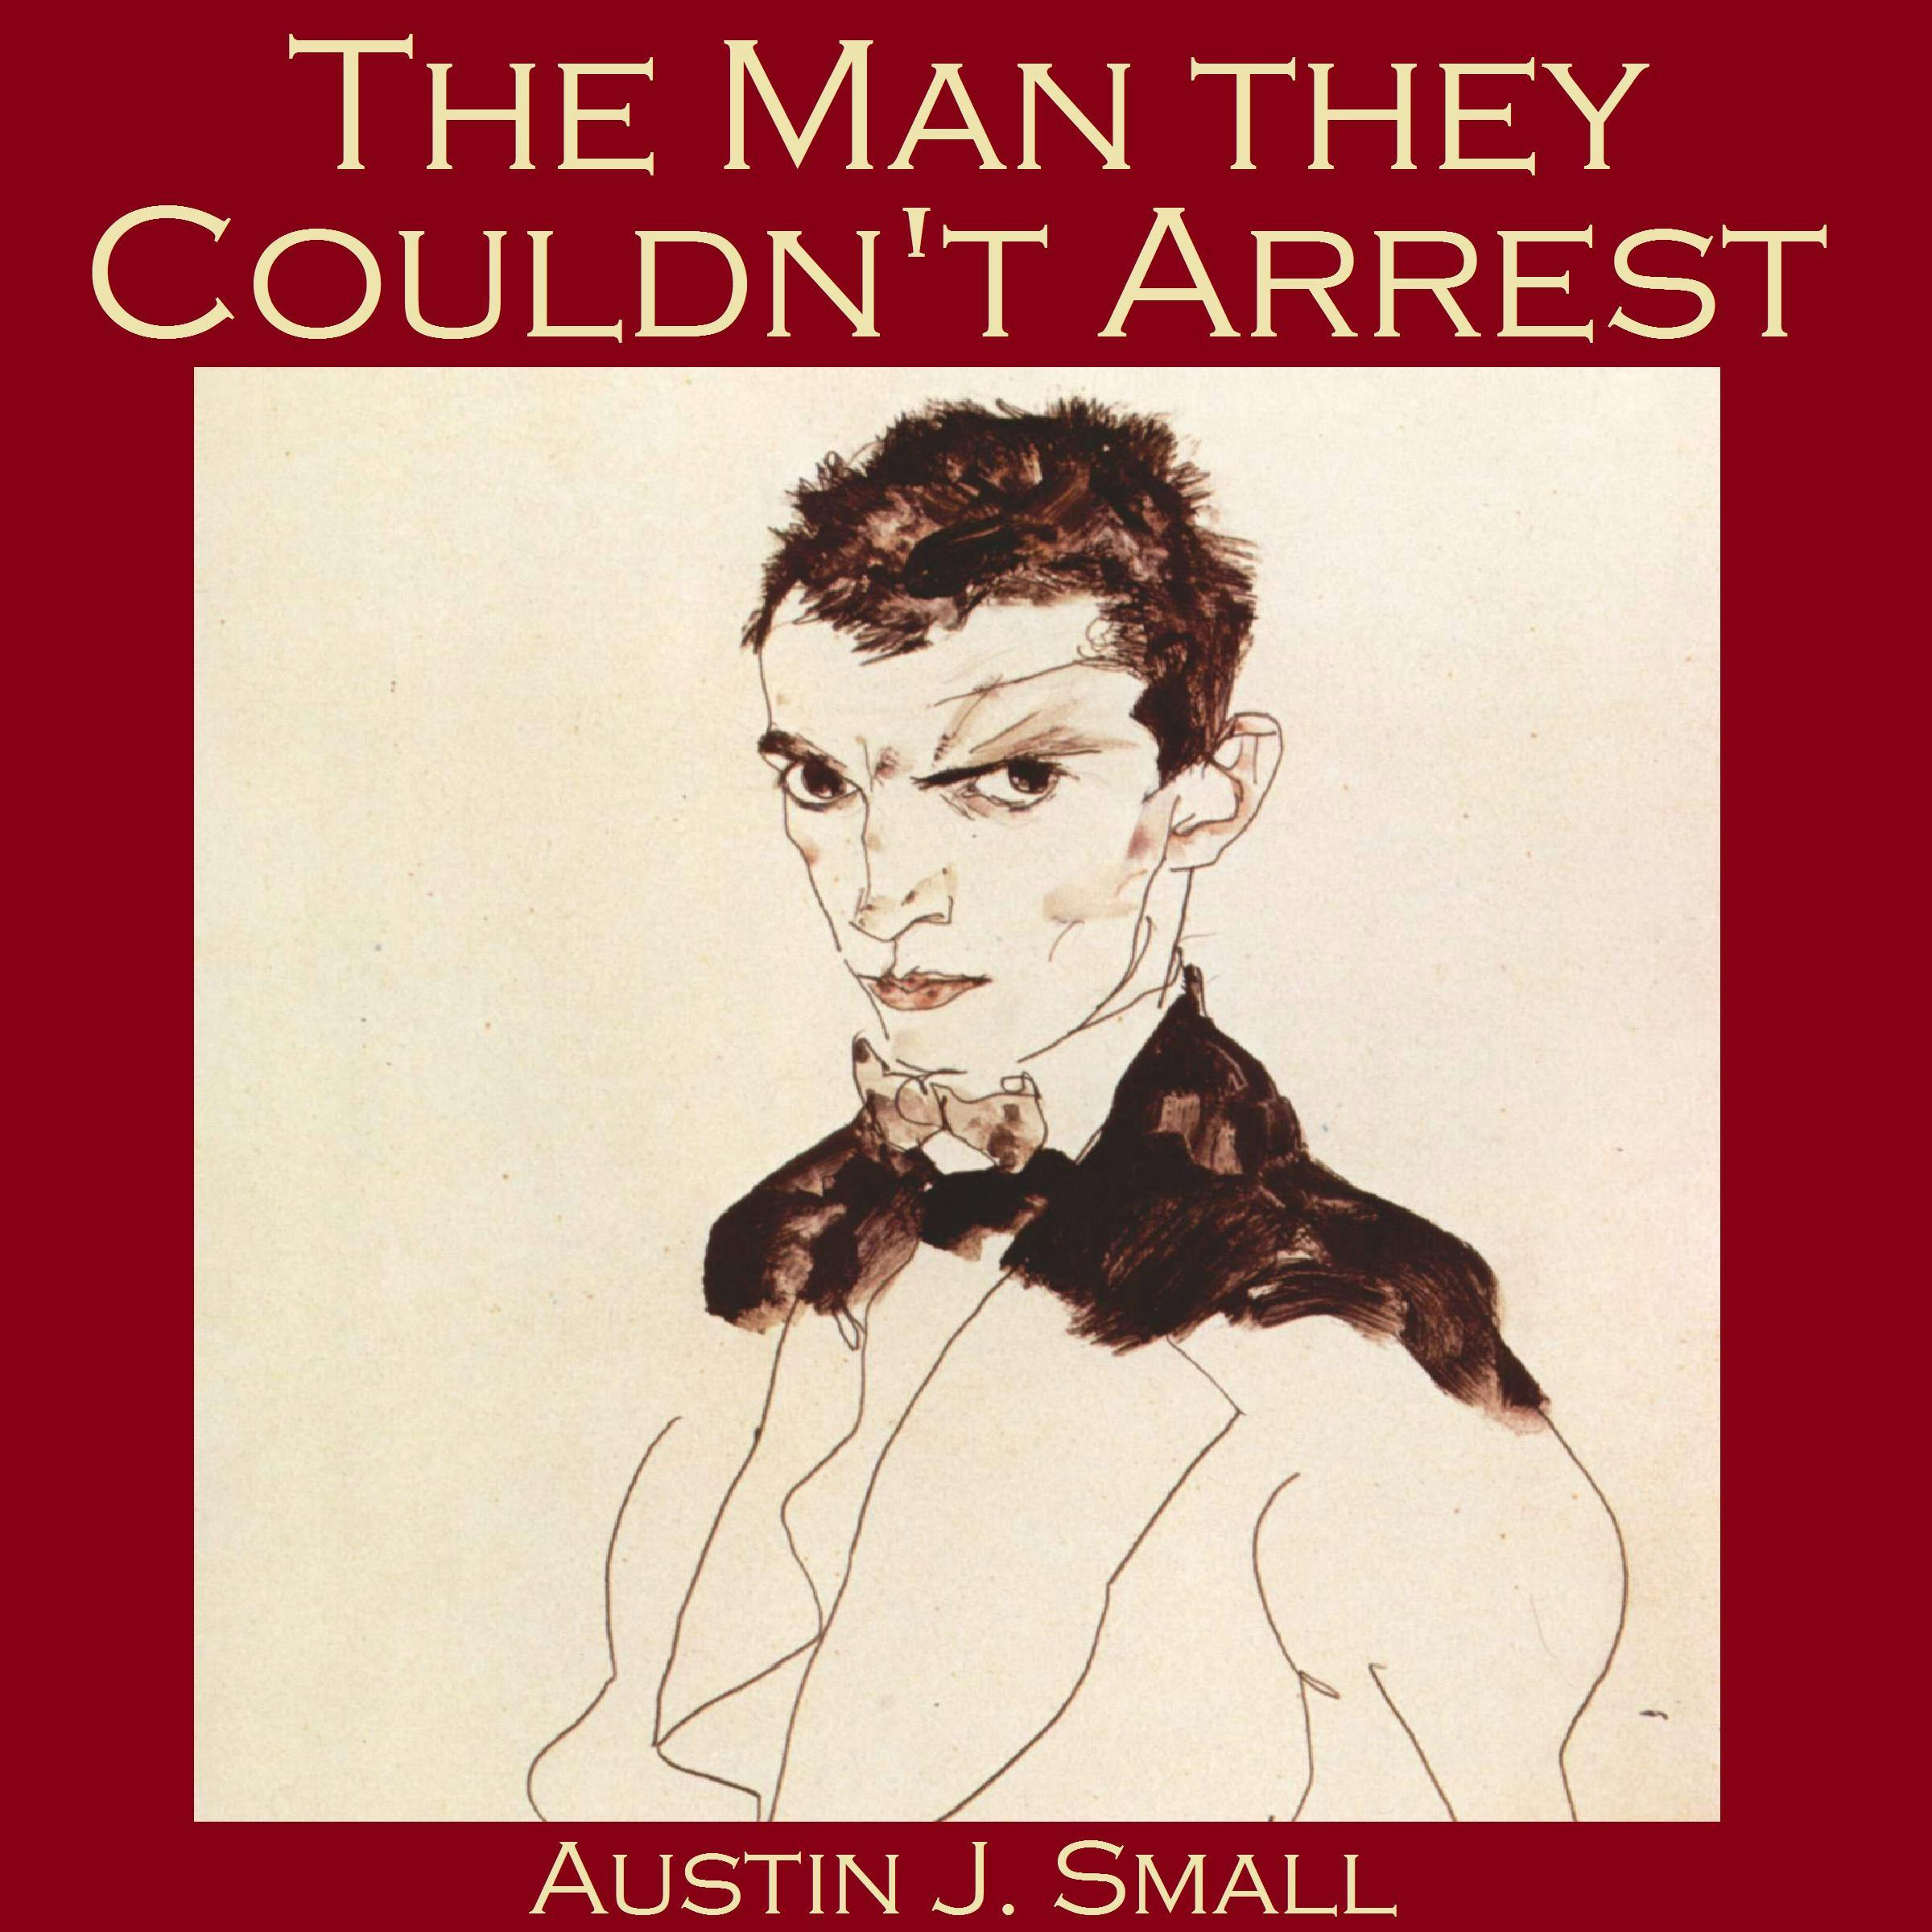 The Man They Couldn't Arrest - Austin J. Small